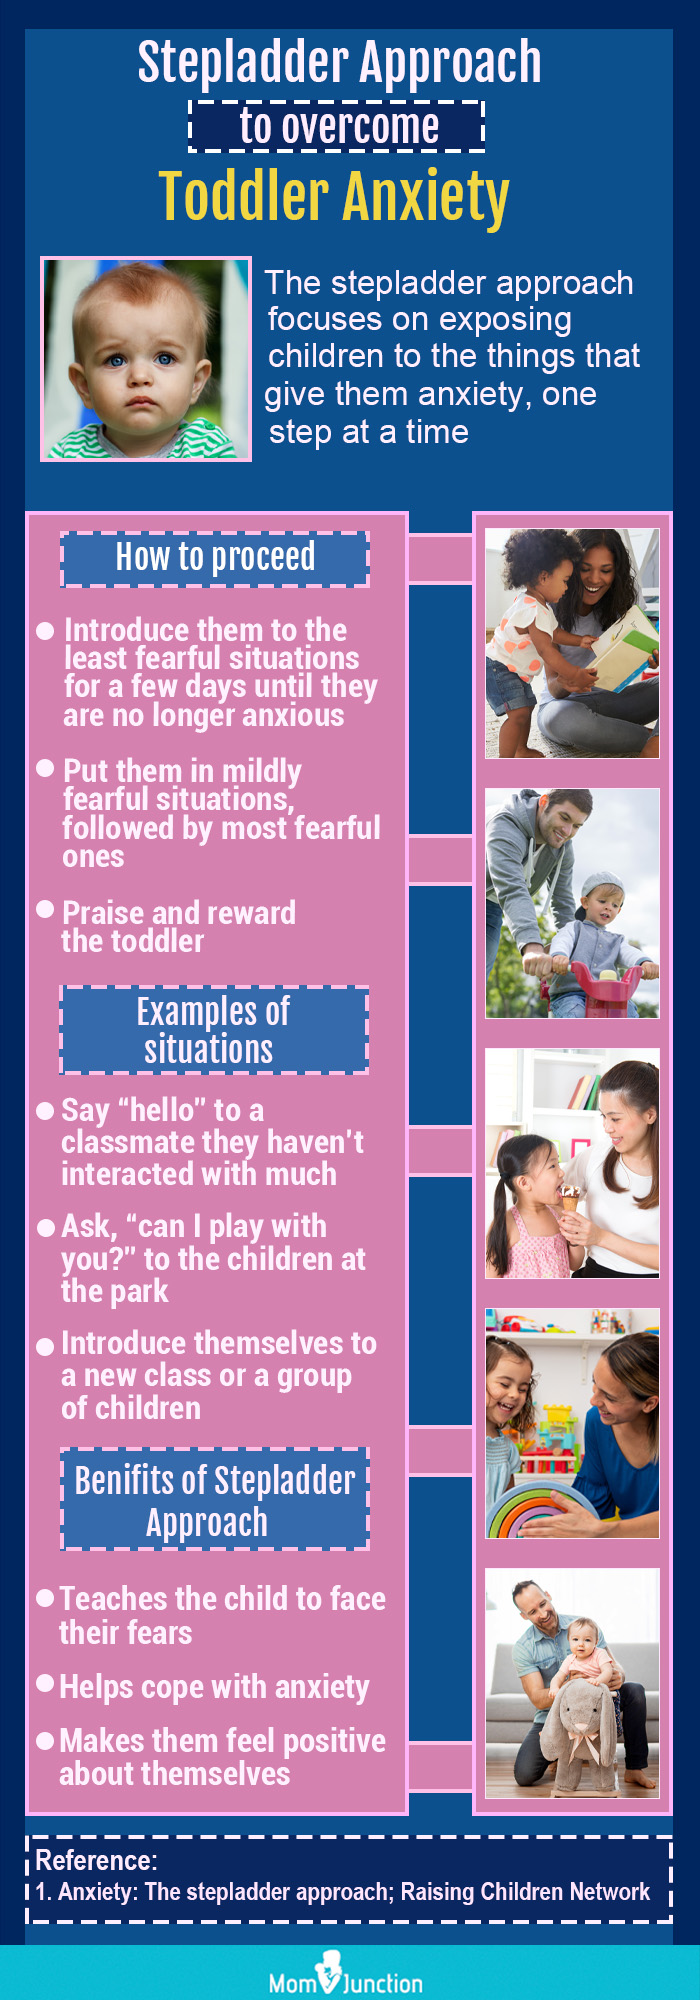 stepladder approach to overcome toddler anxiety (infographic)